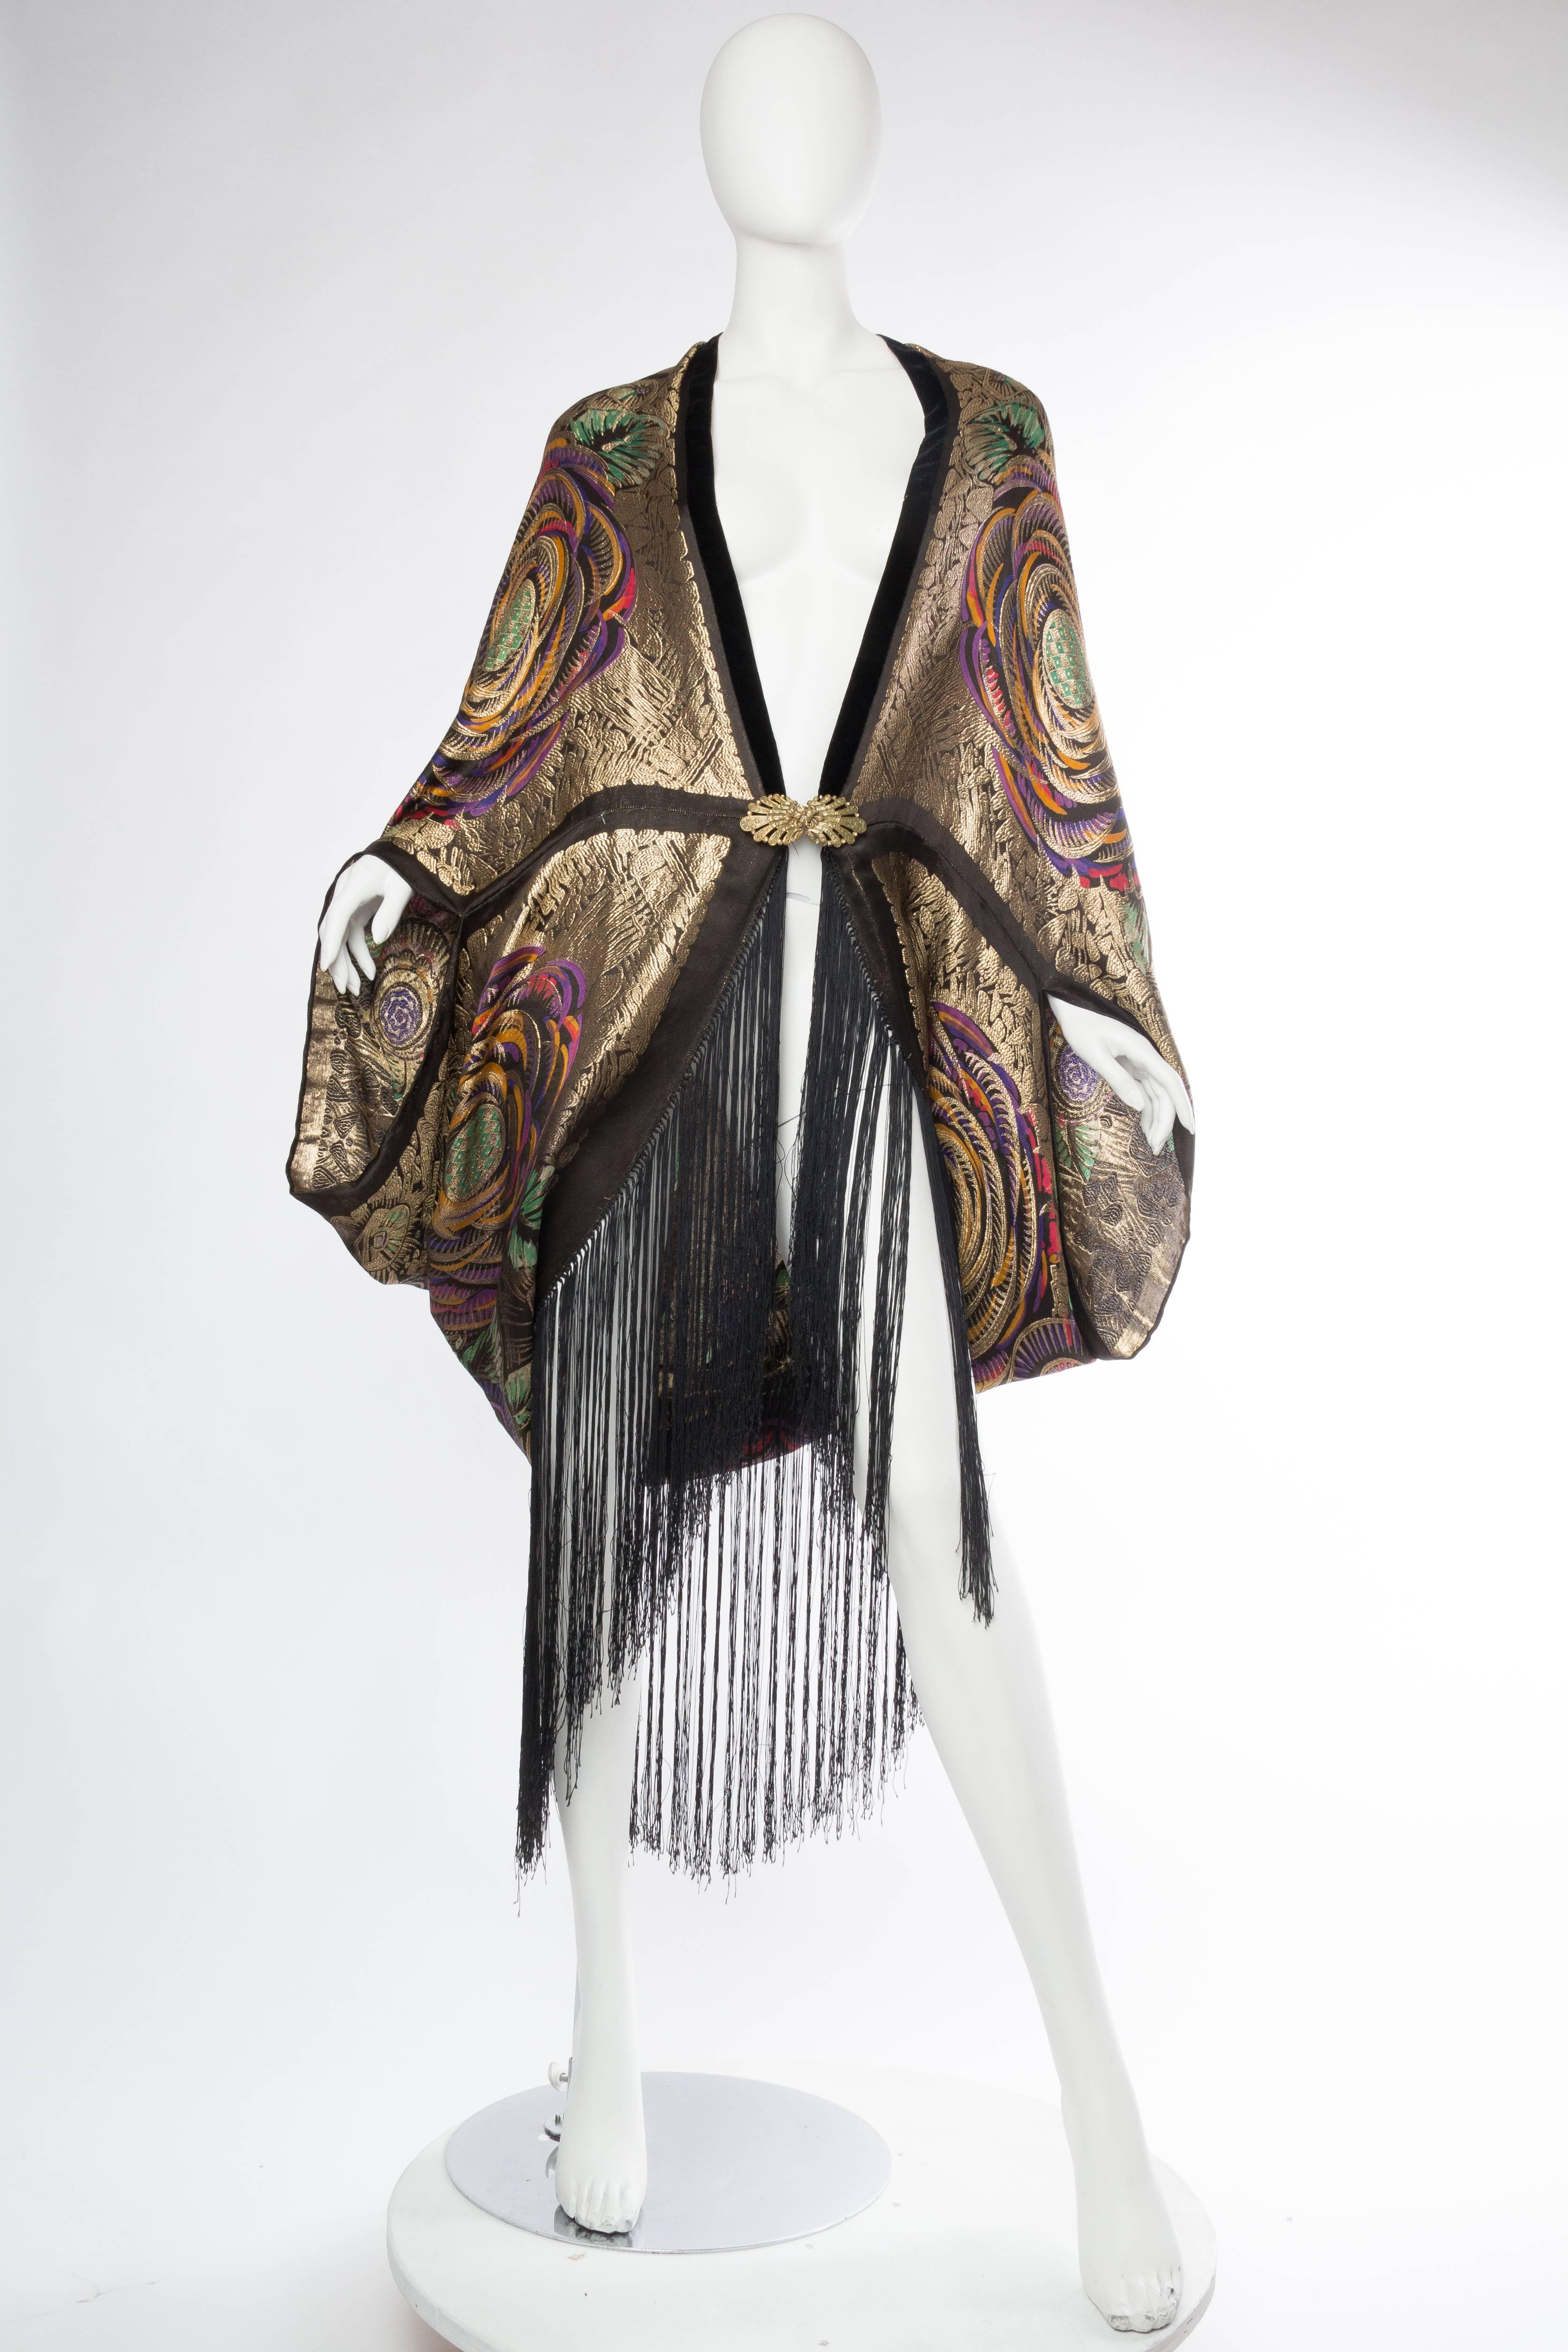 This jaw dropping beauty is made from an original 1920s gold lamé shawl. True 